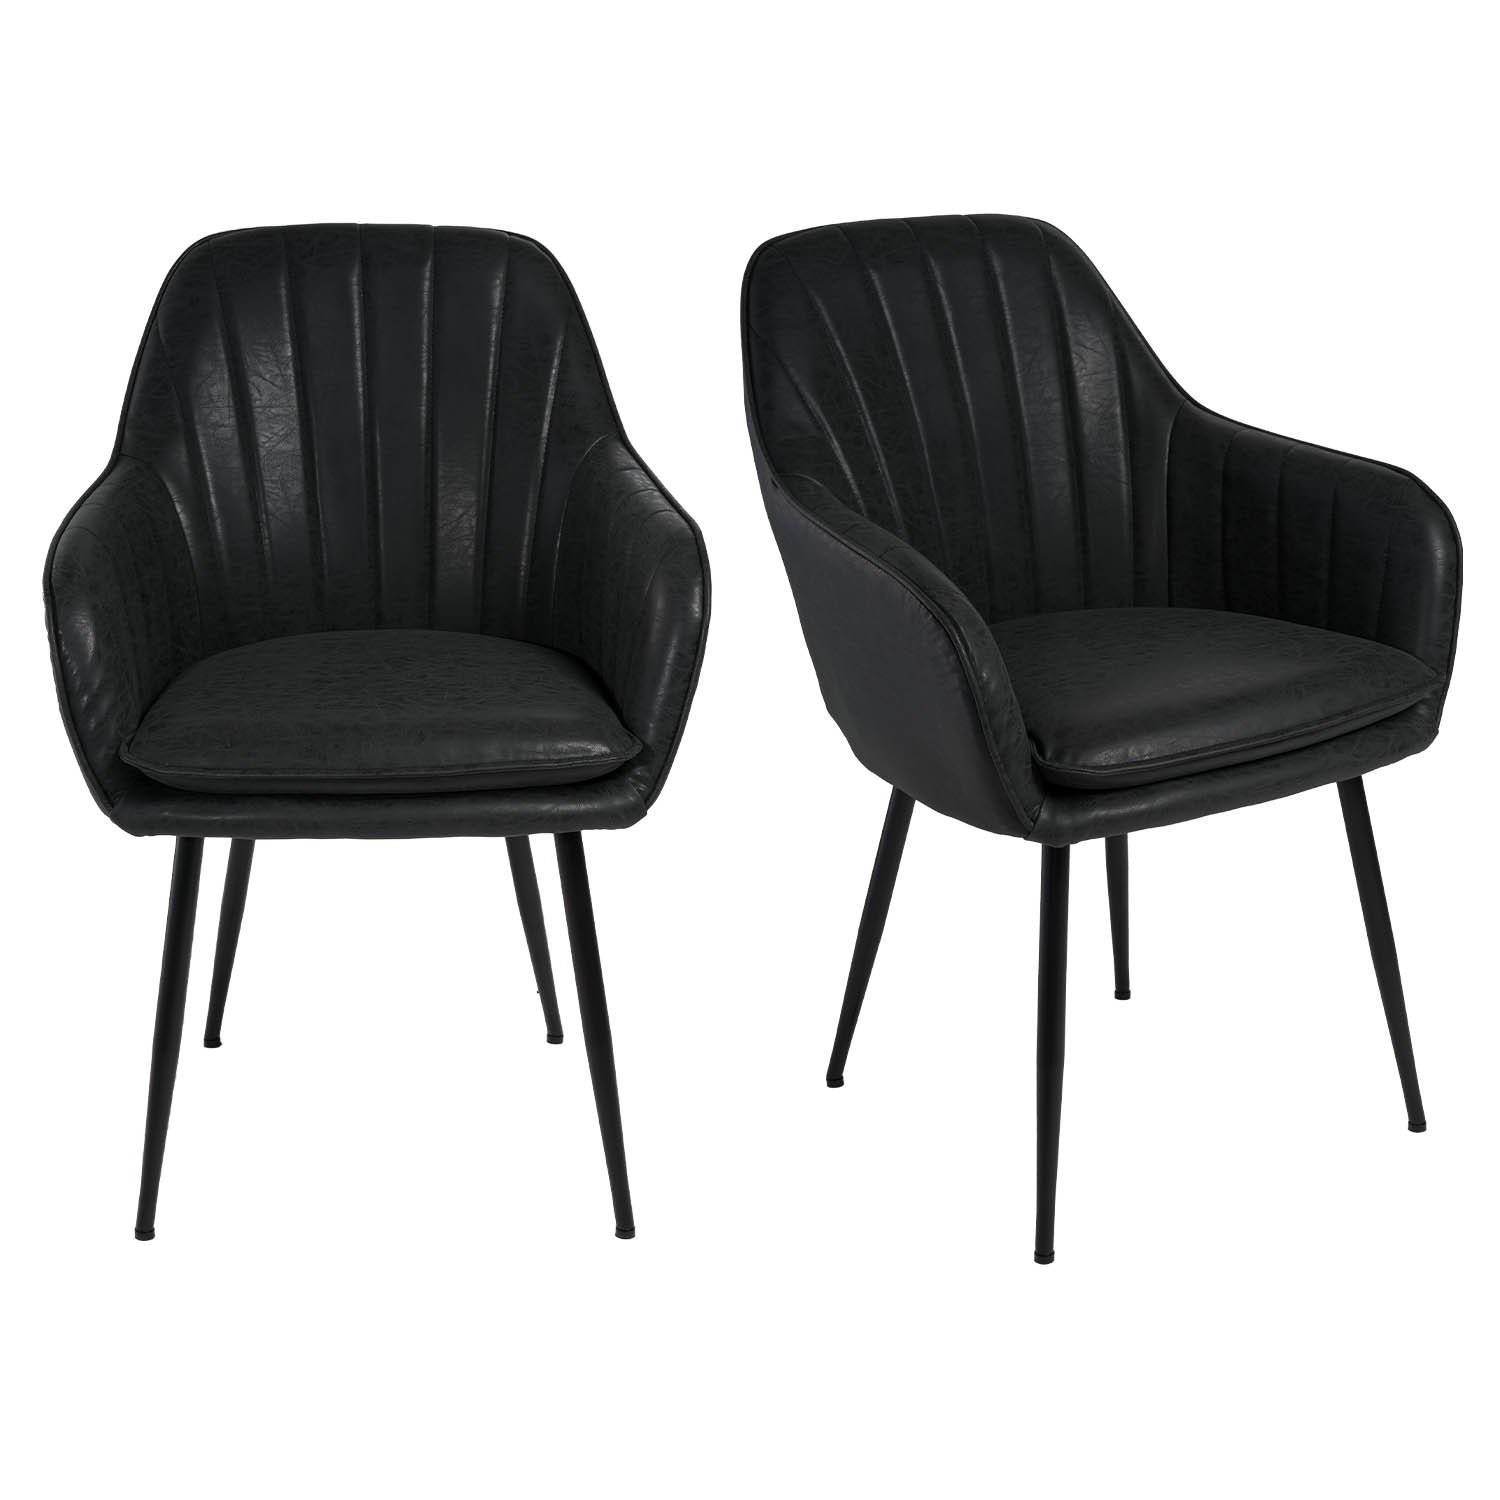 Photo of Set of 2 black faux leather tub dining chairs - logan